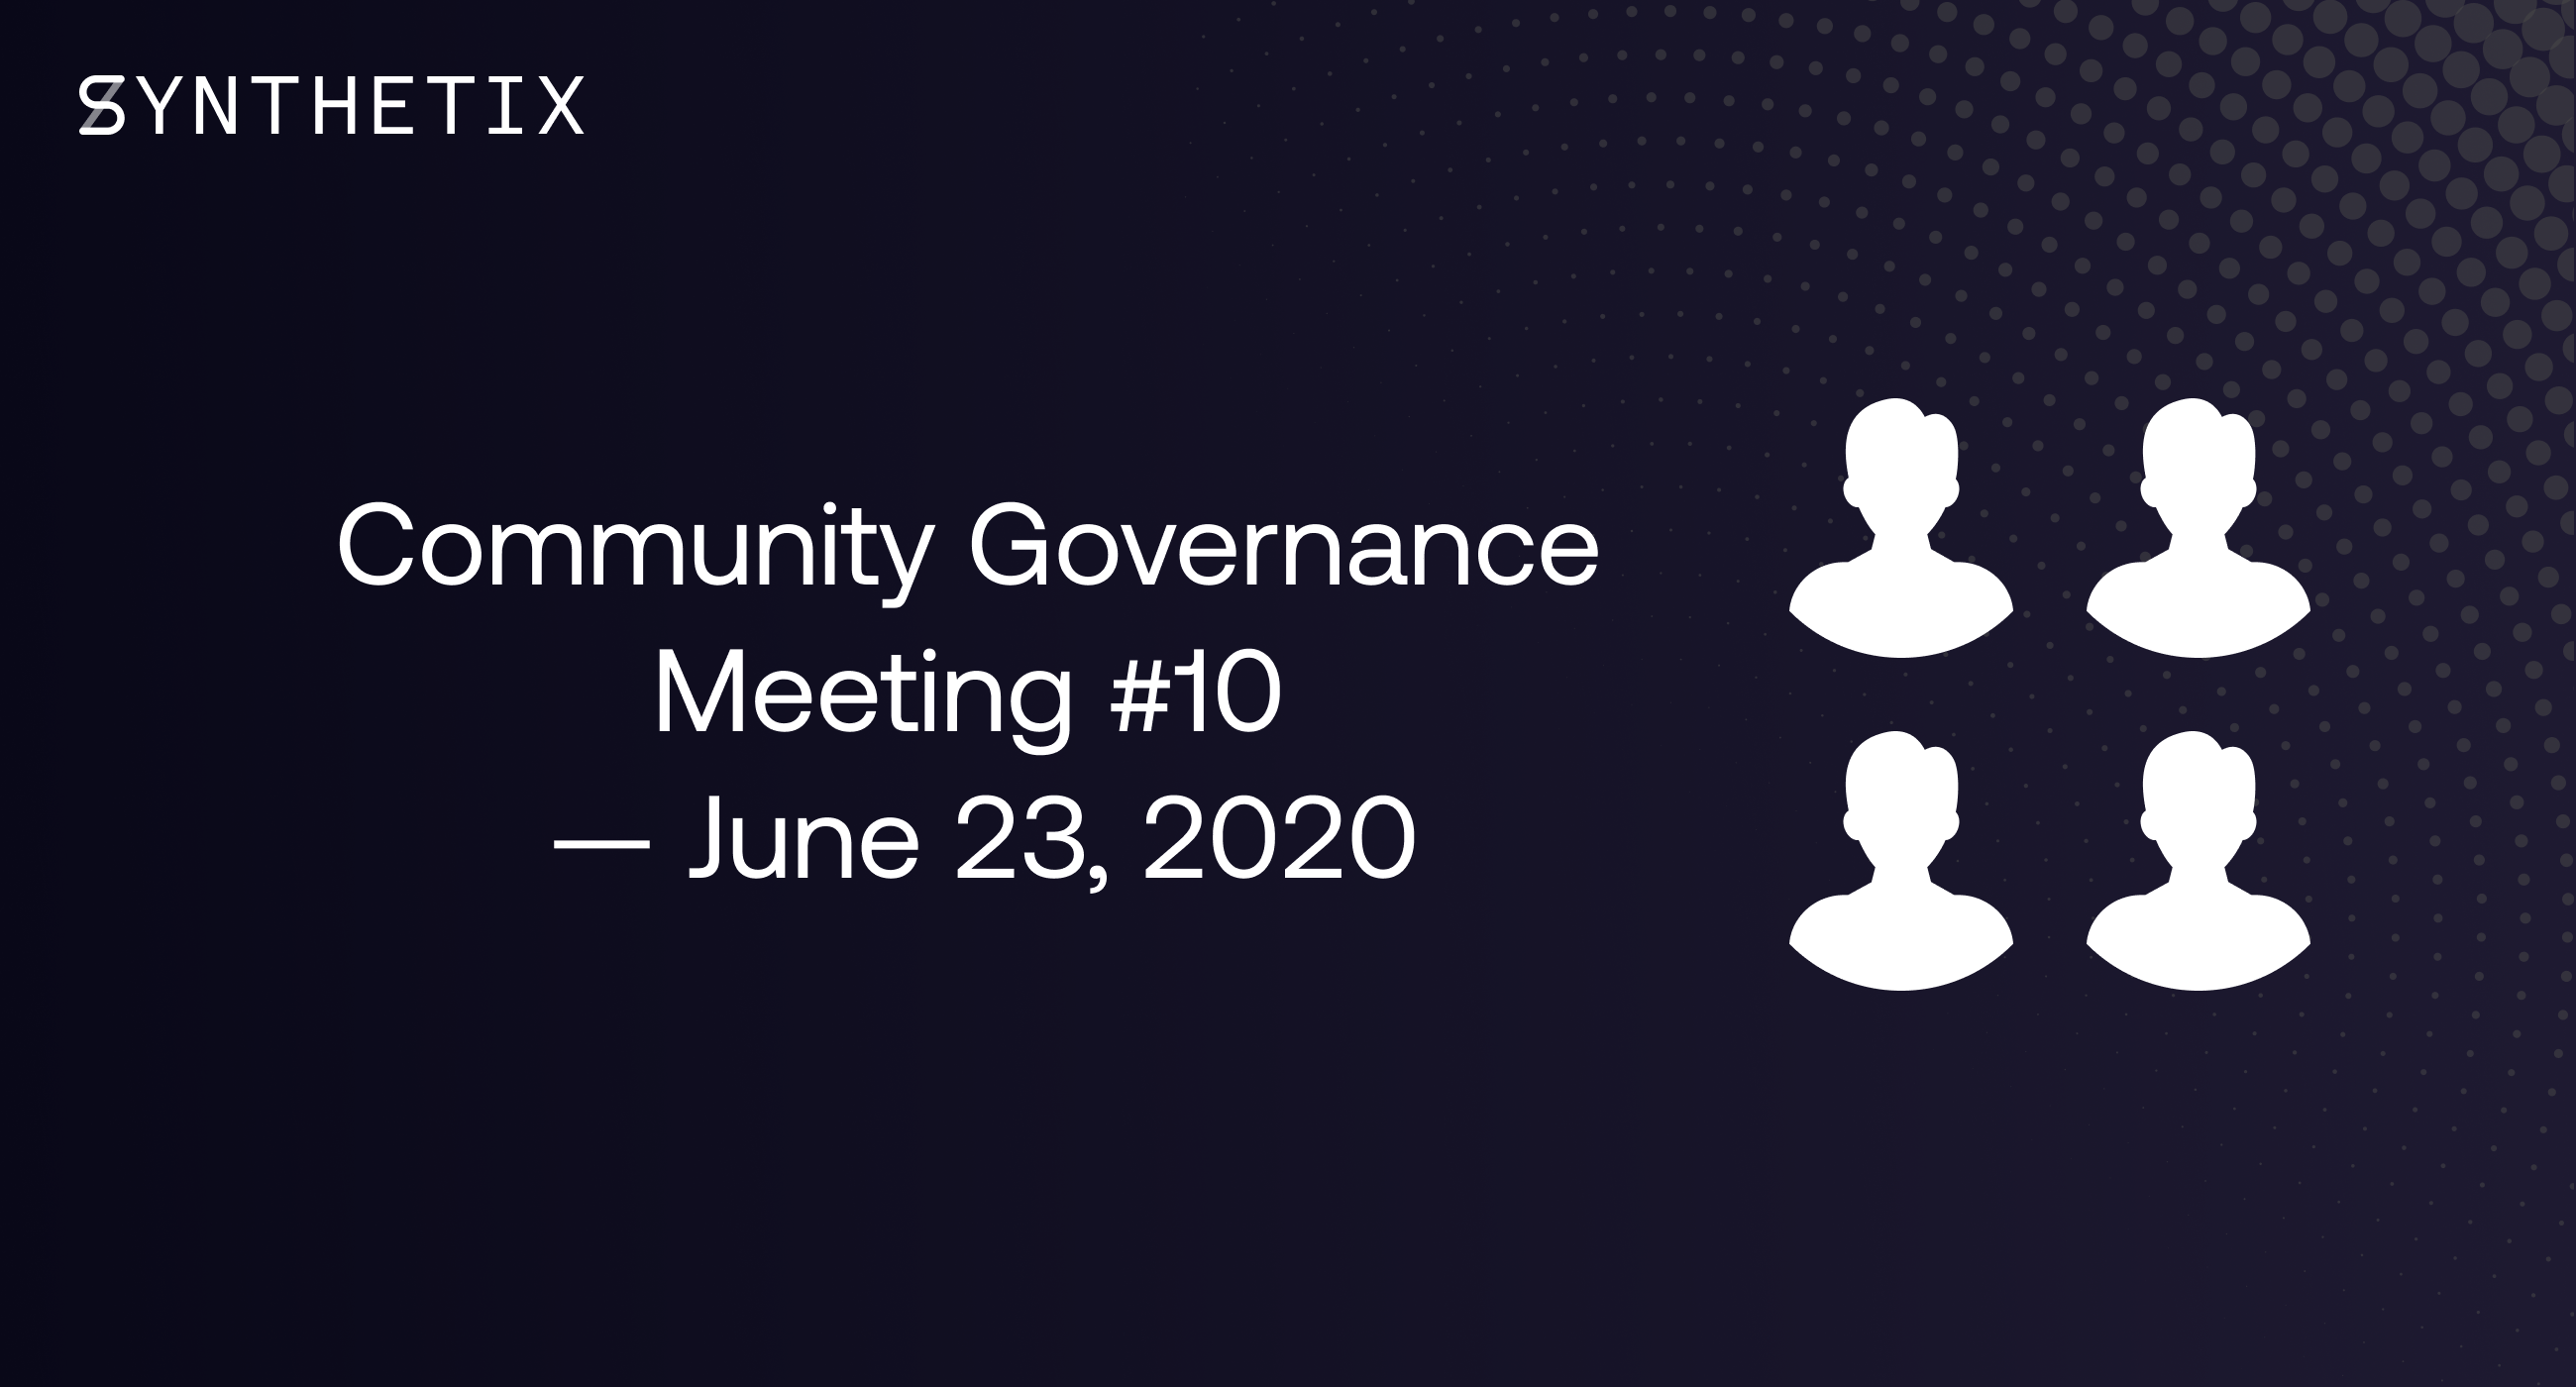 Join us on June 23 for the next community governance call!